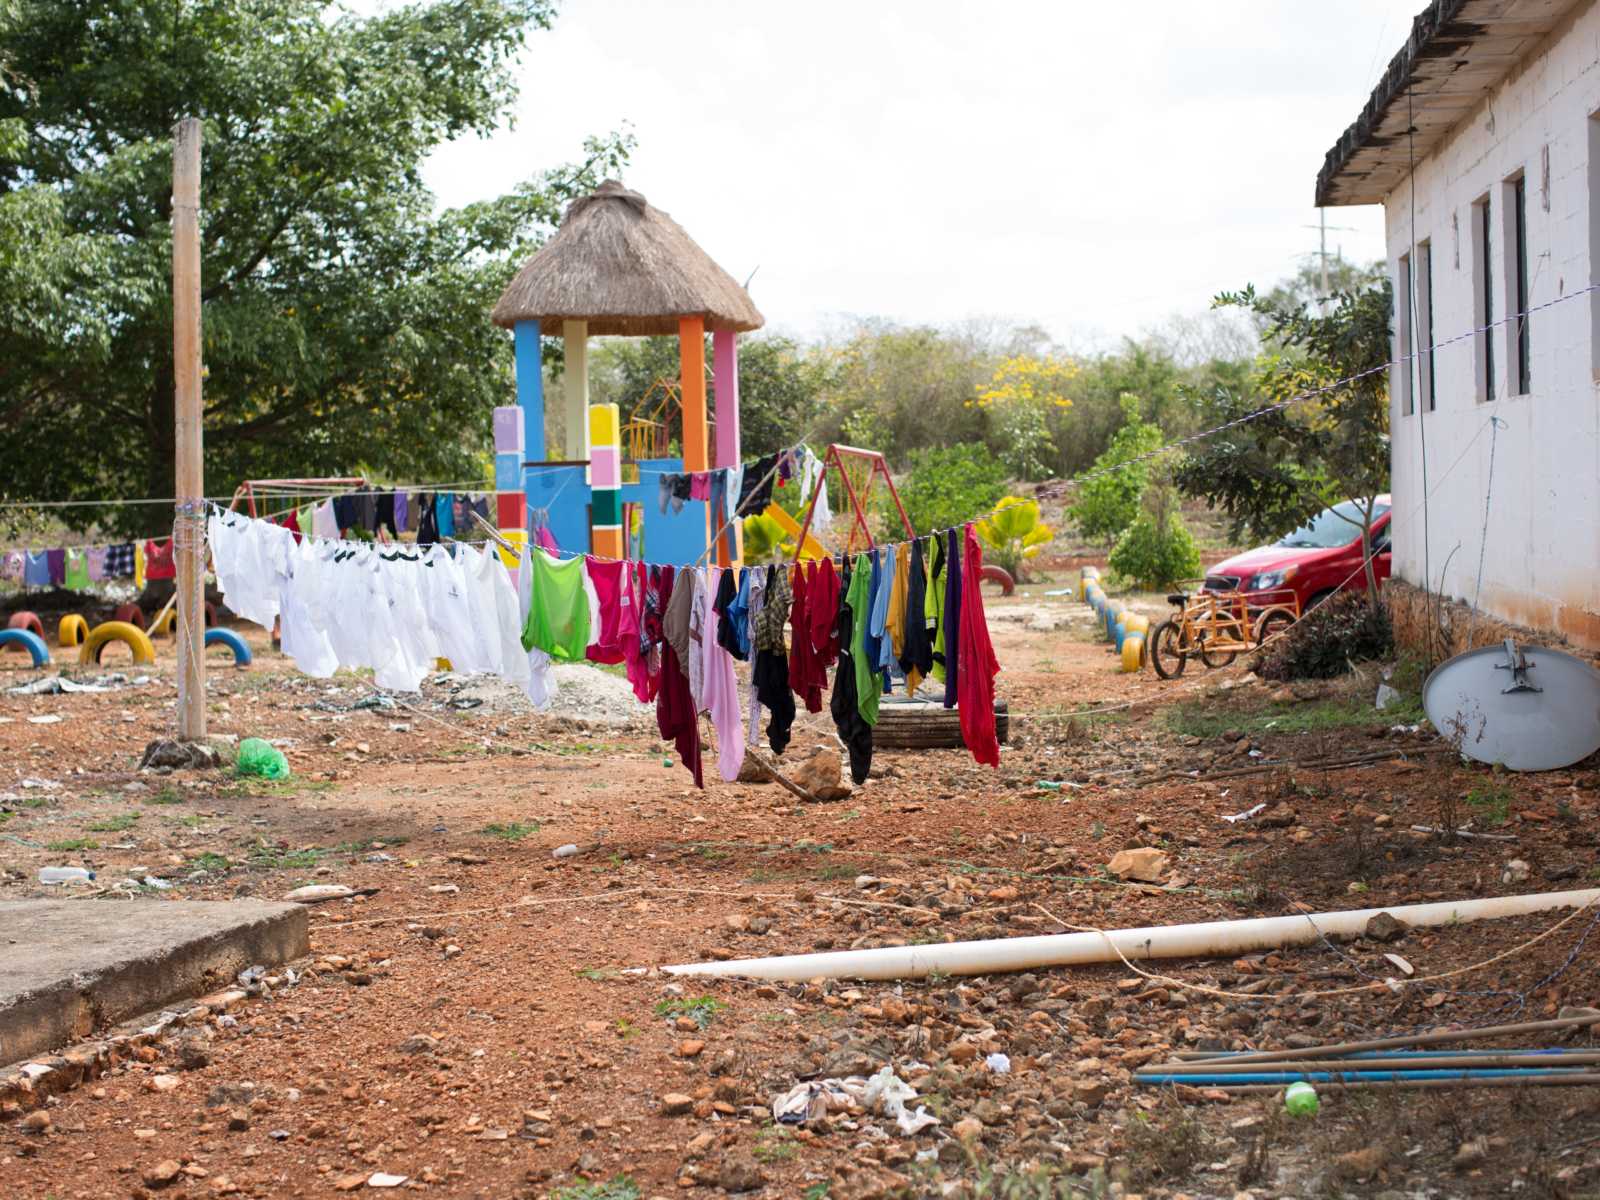 Clothes line with colorful clothes hanging outside of orphanage in Mexico. 